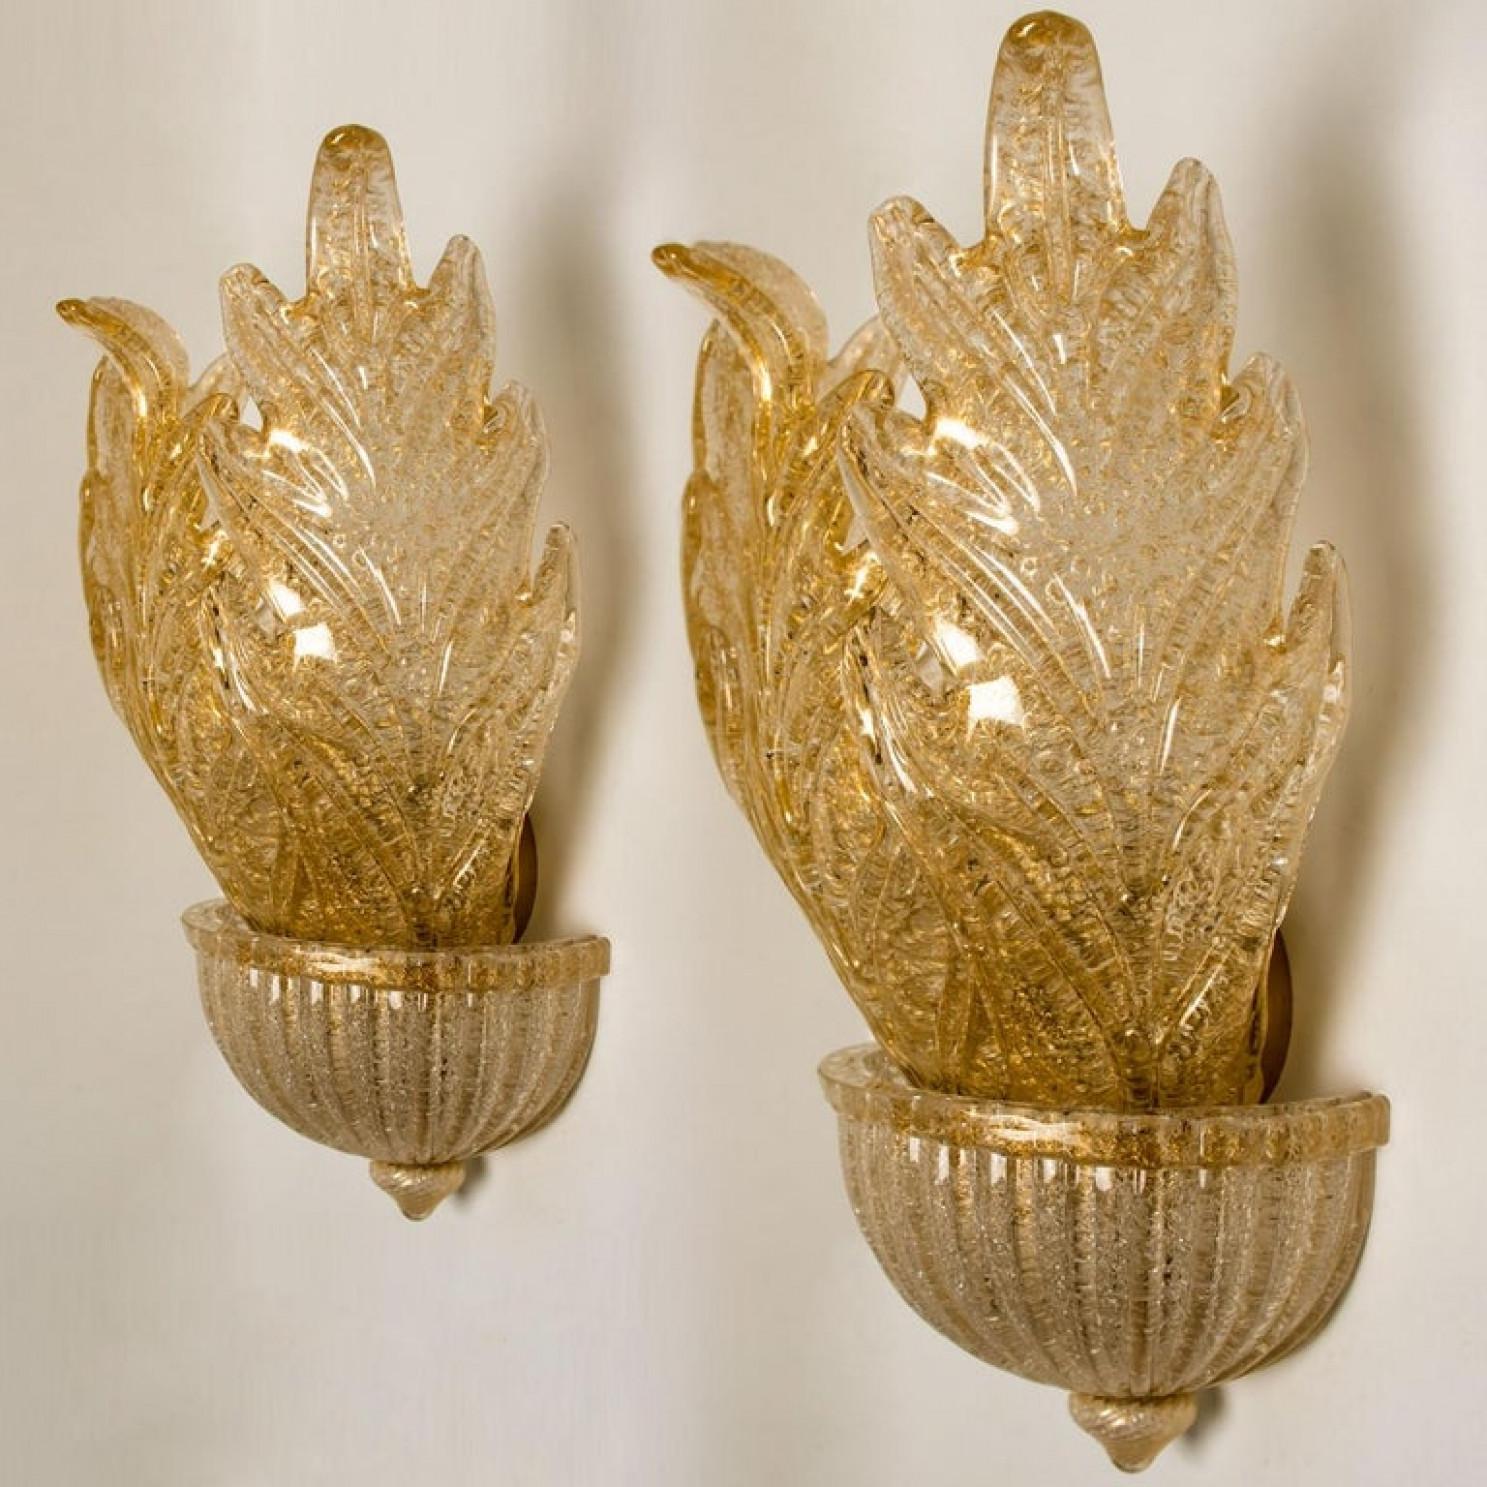 1 of the 6 XL Wall Sconces Barovier & Toso Murano Glass and Gold-Plated, 1960 For Sale 5